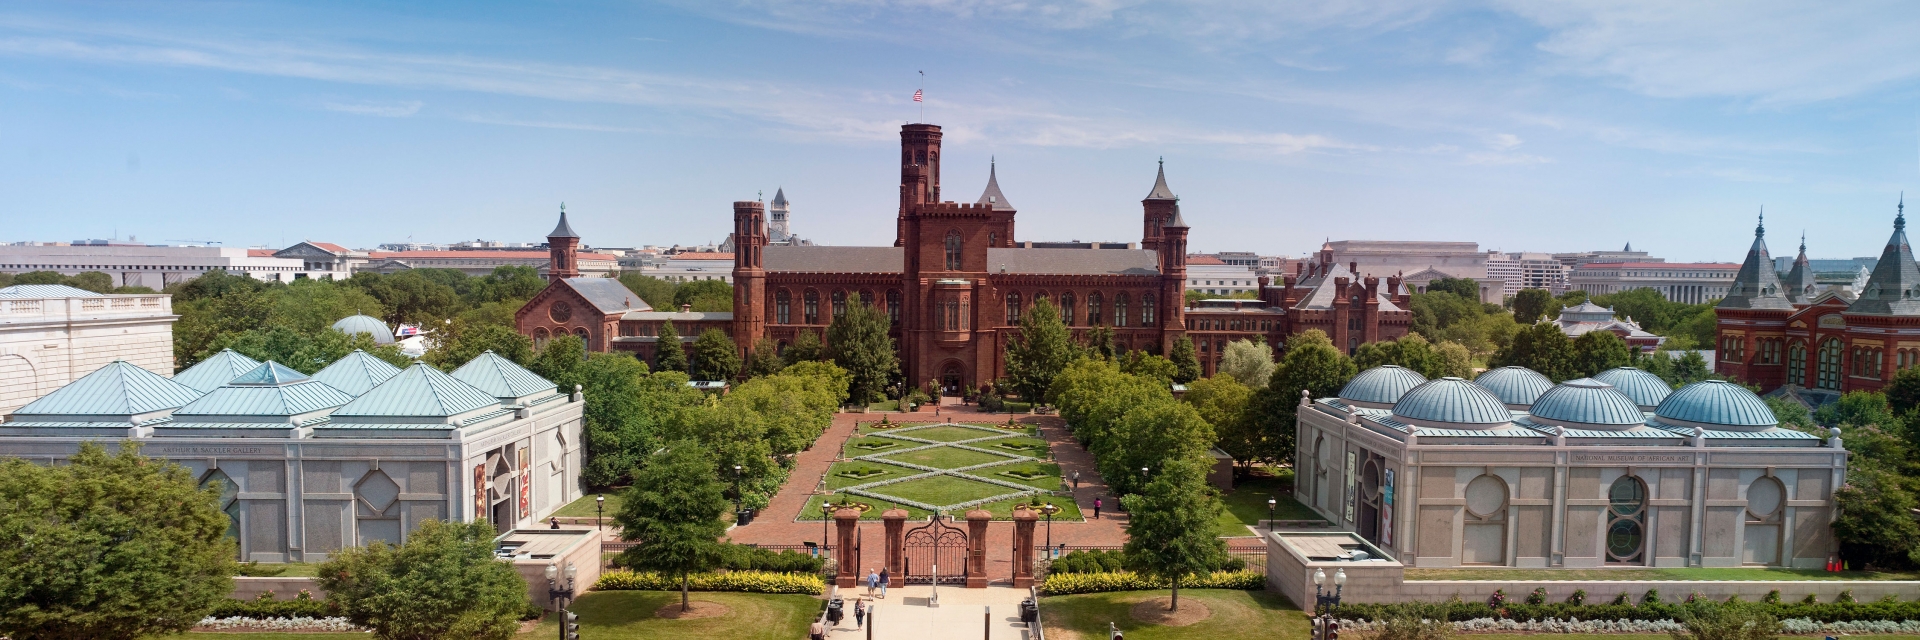 Aerial view of Castle and surrounding Smithsonian museums.